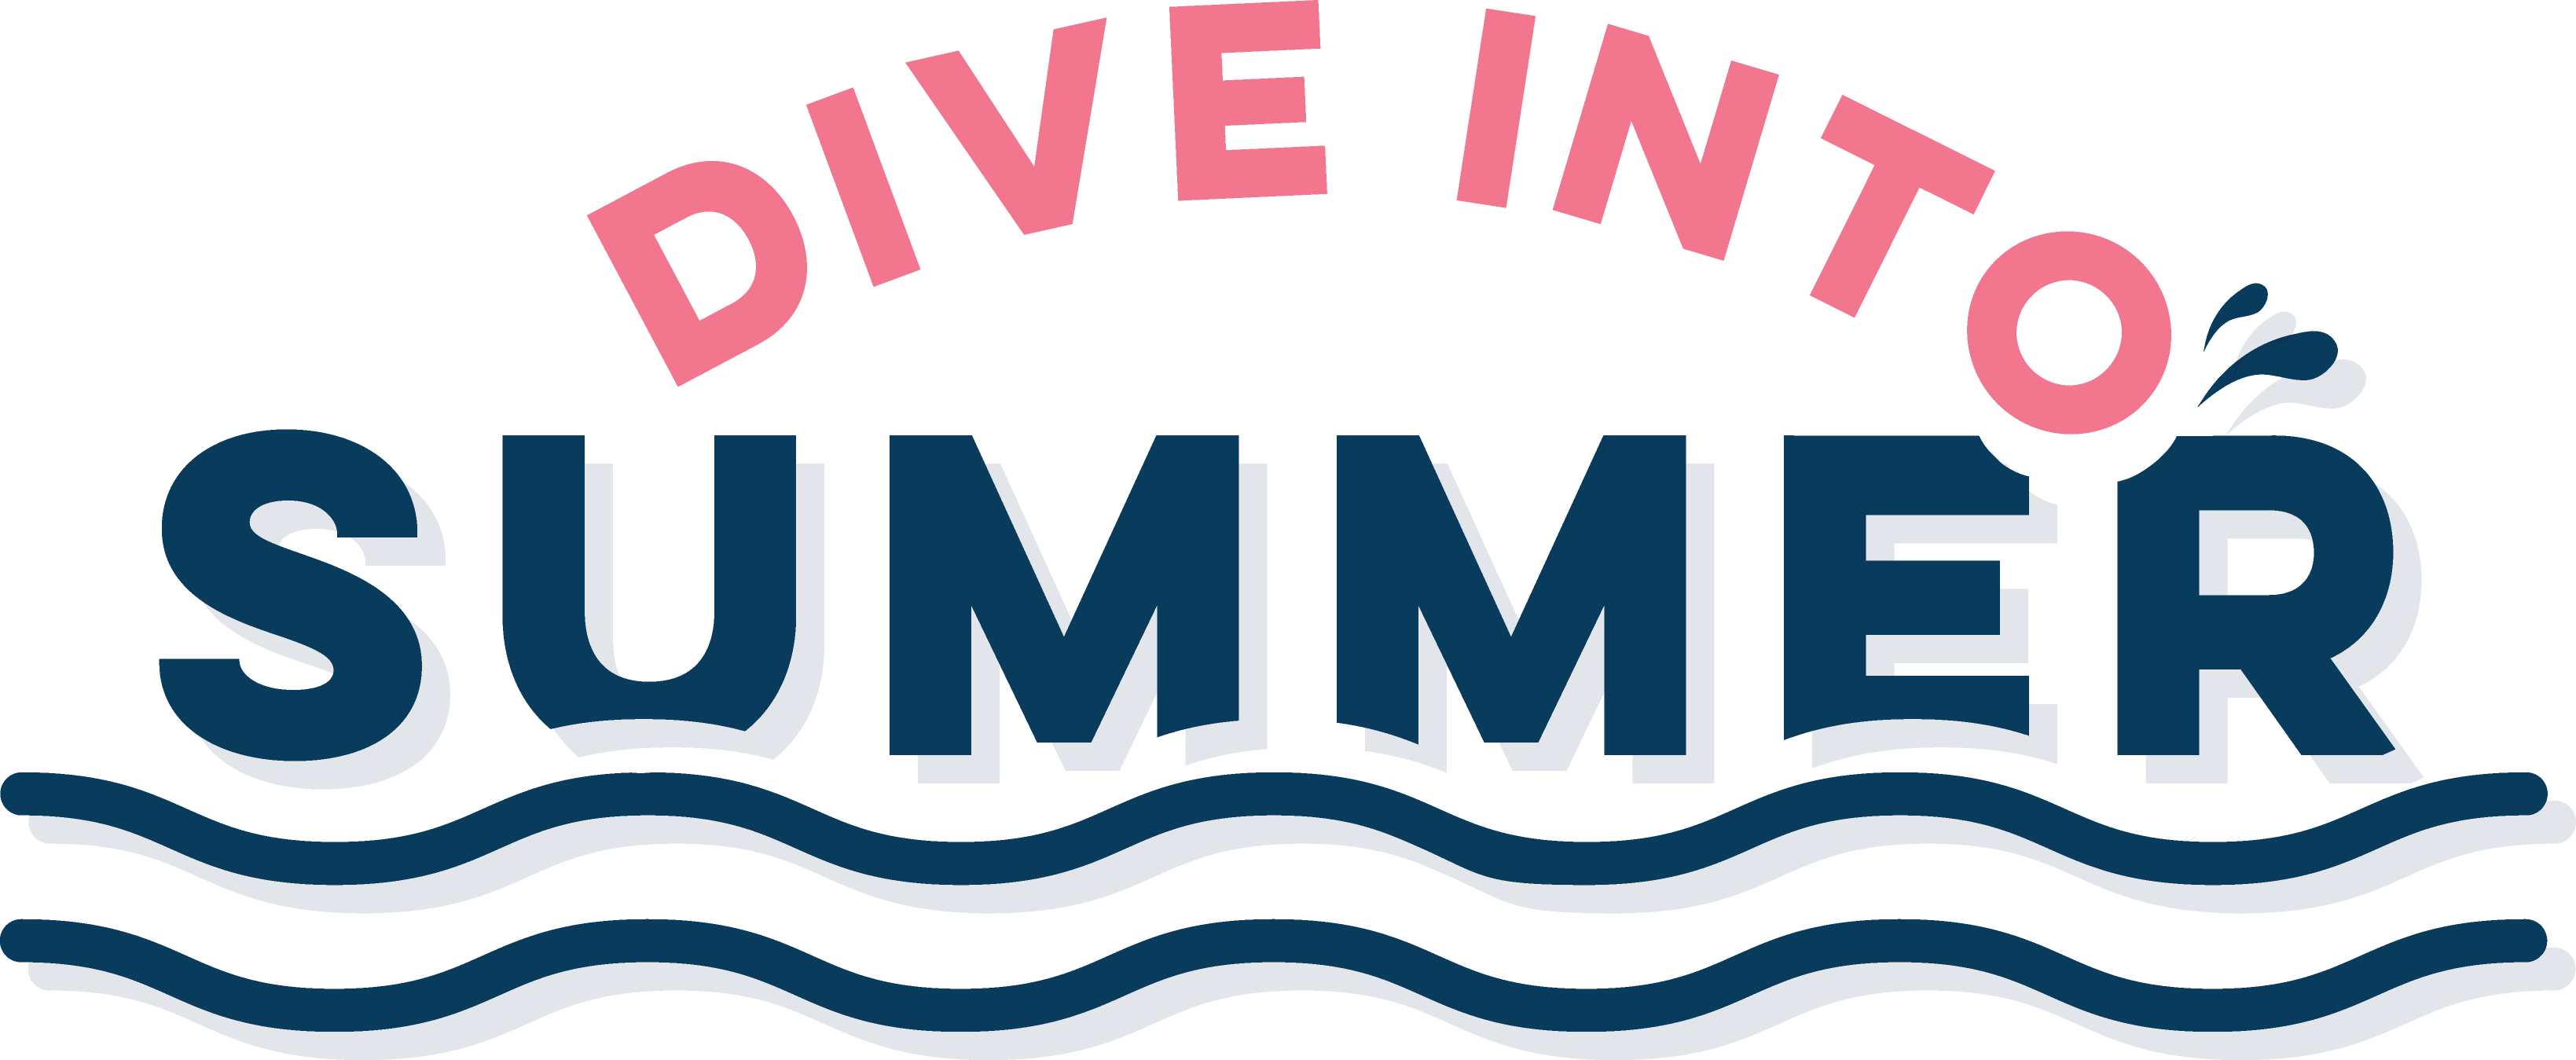 Dive into Summer